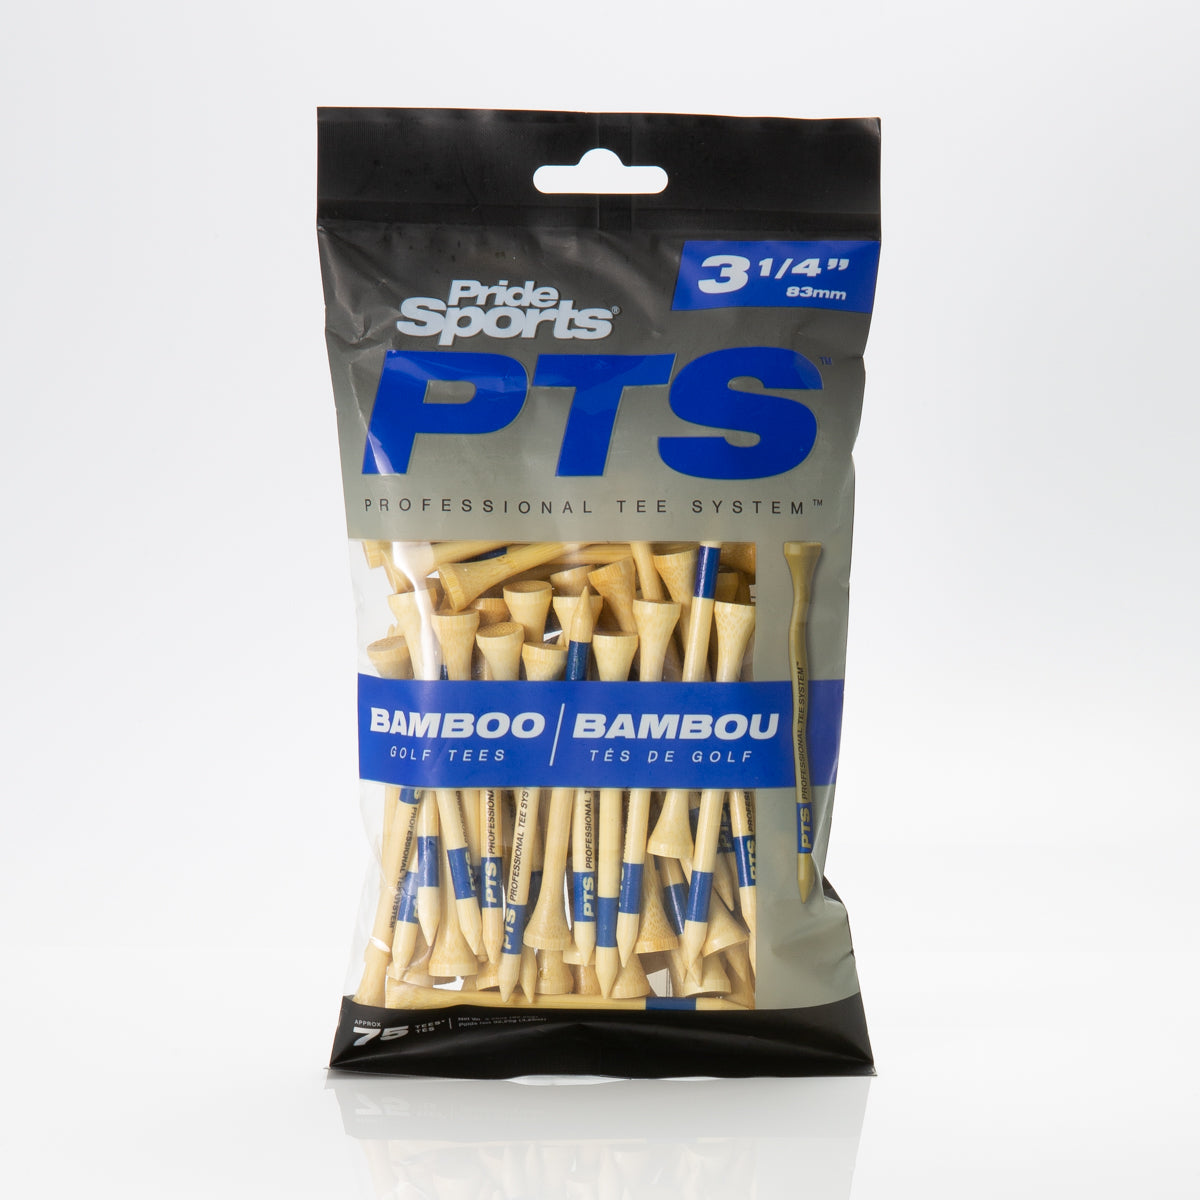 Professional Tee System™ (PTS)- 3 1/4" Bamboo Tees